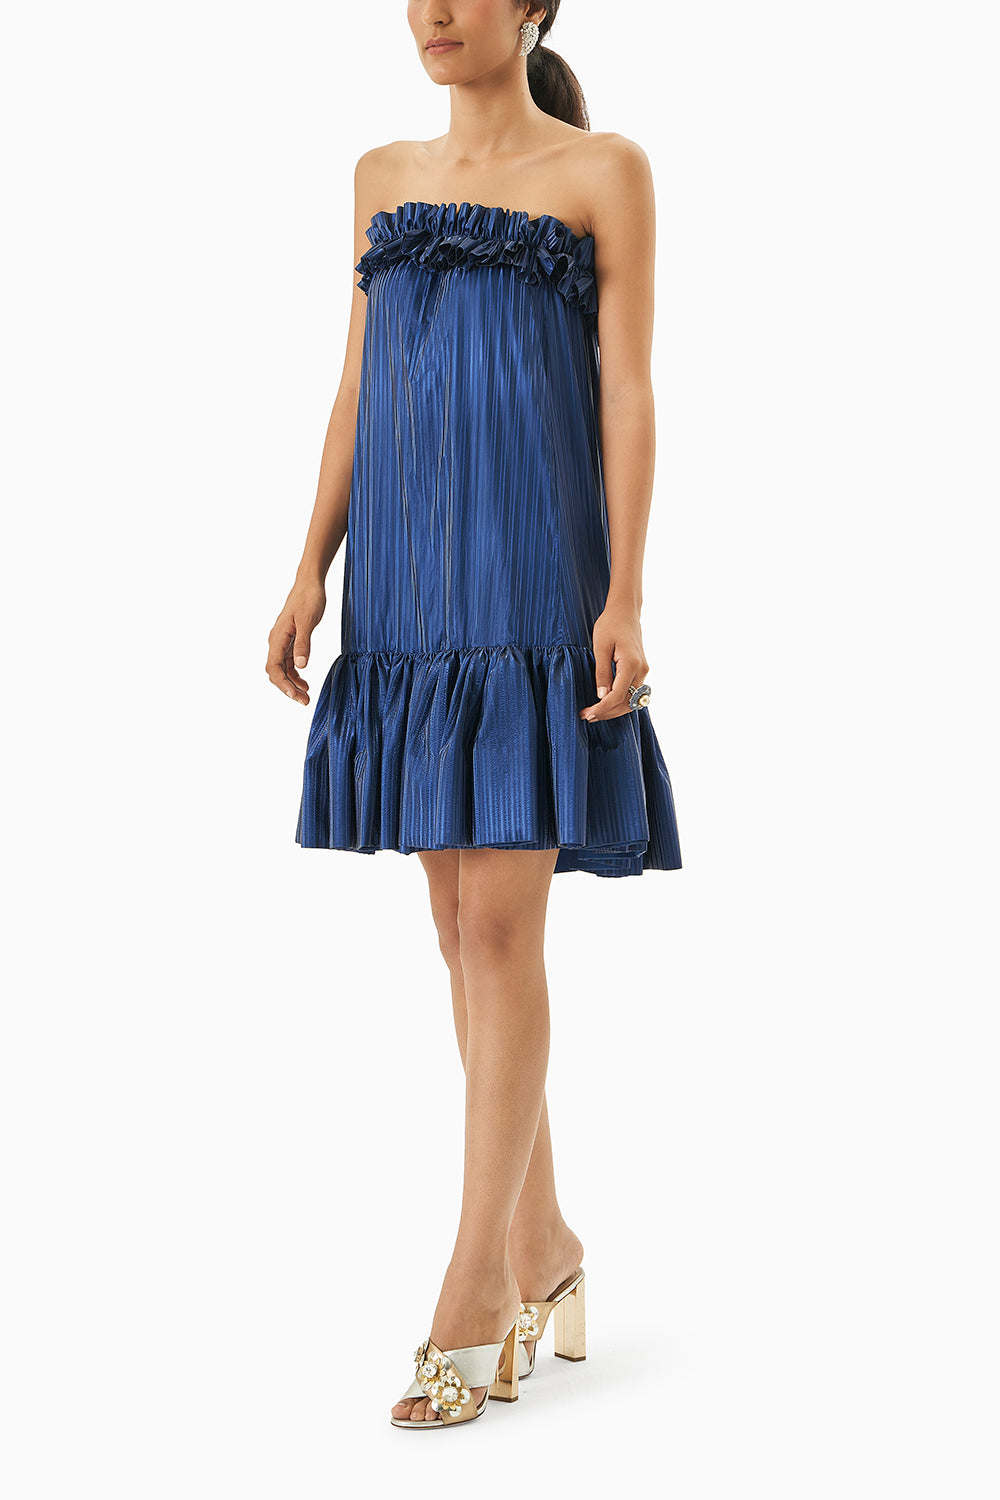 Electric Blue Ruffled Strapless Dress